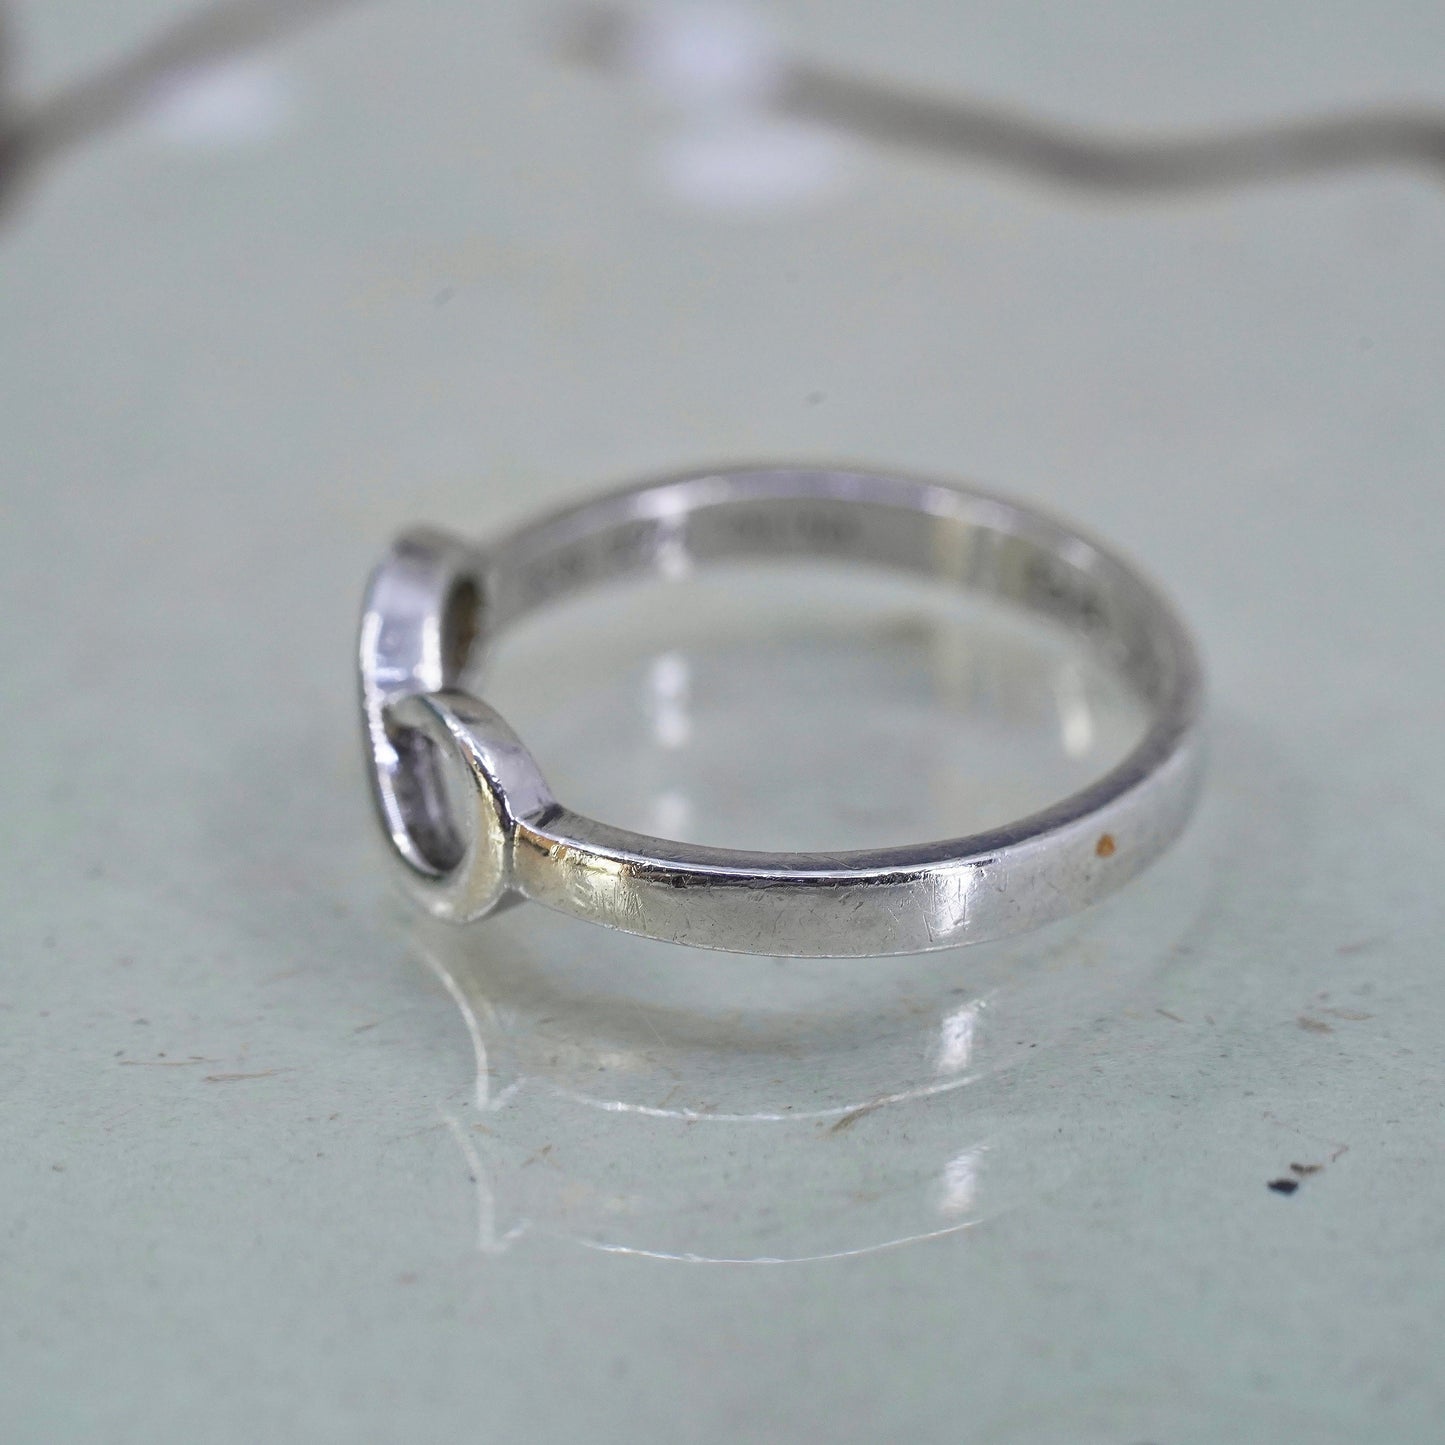 Size 7, Sterling silver handmade ring, stackable 925 infinity band “daughter”